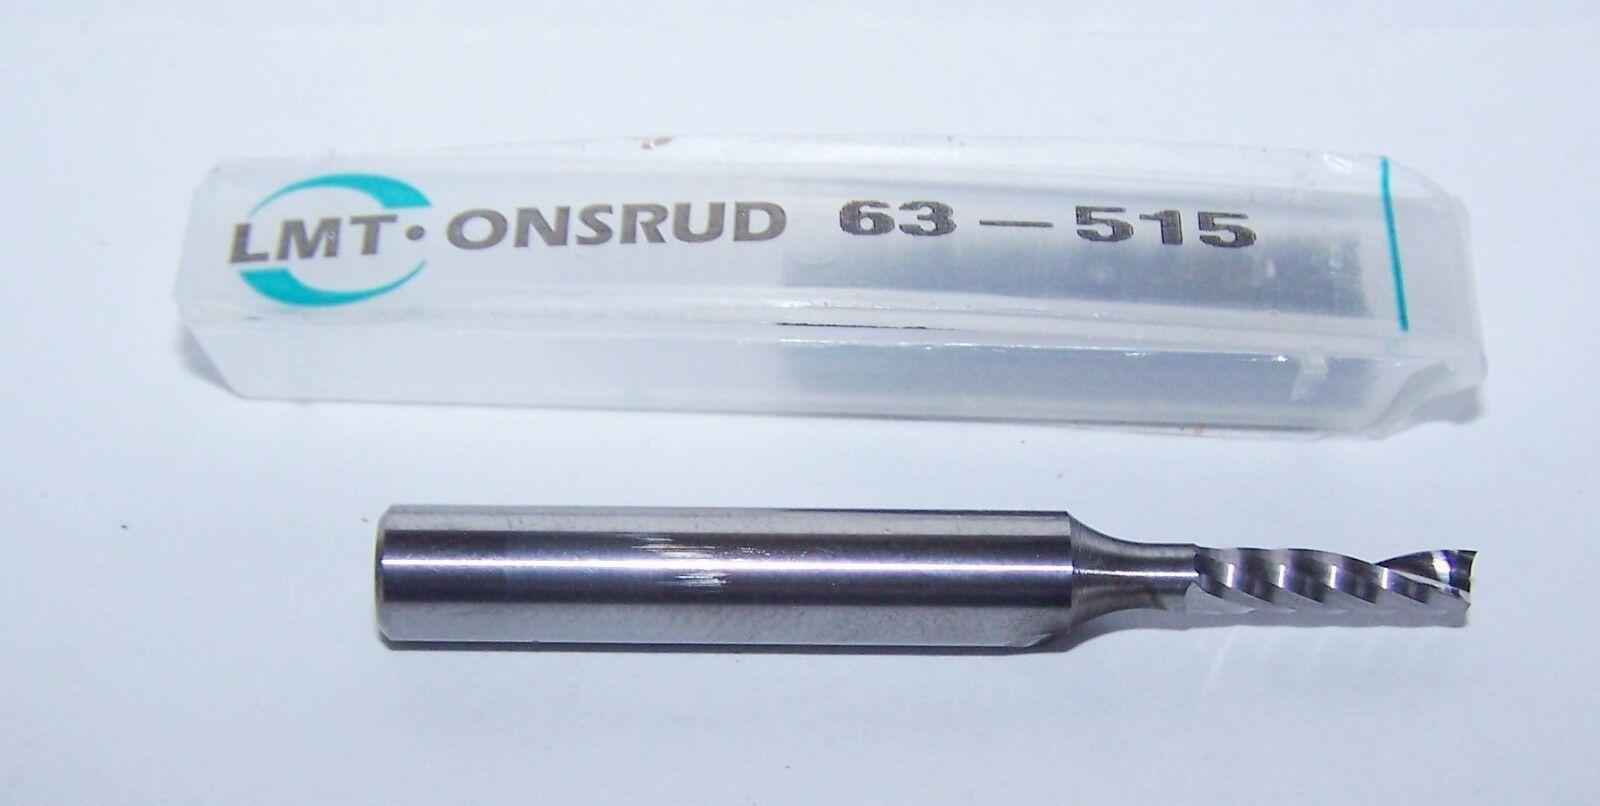 Onsrud Logo - Onsrud 63-515 Routing End Mill up O-flute 1/8 1/2 2